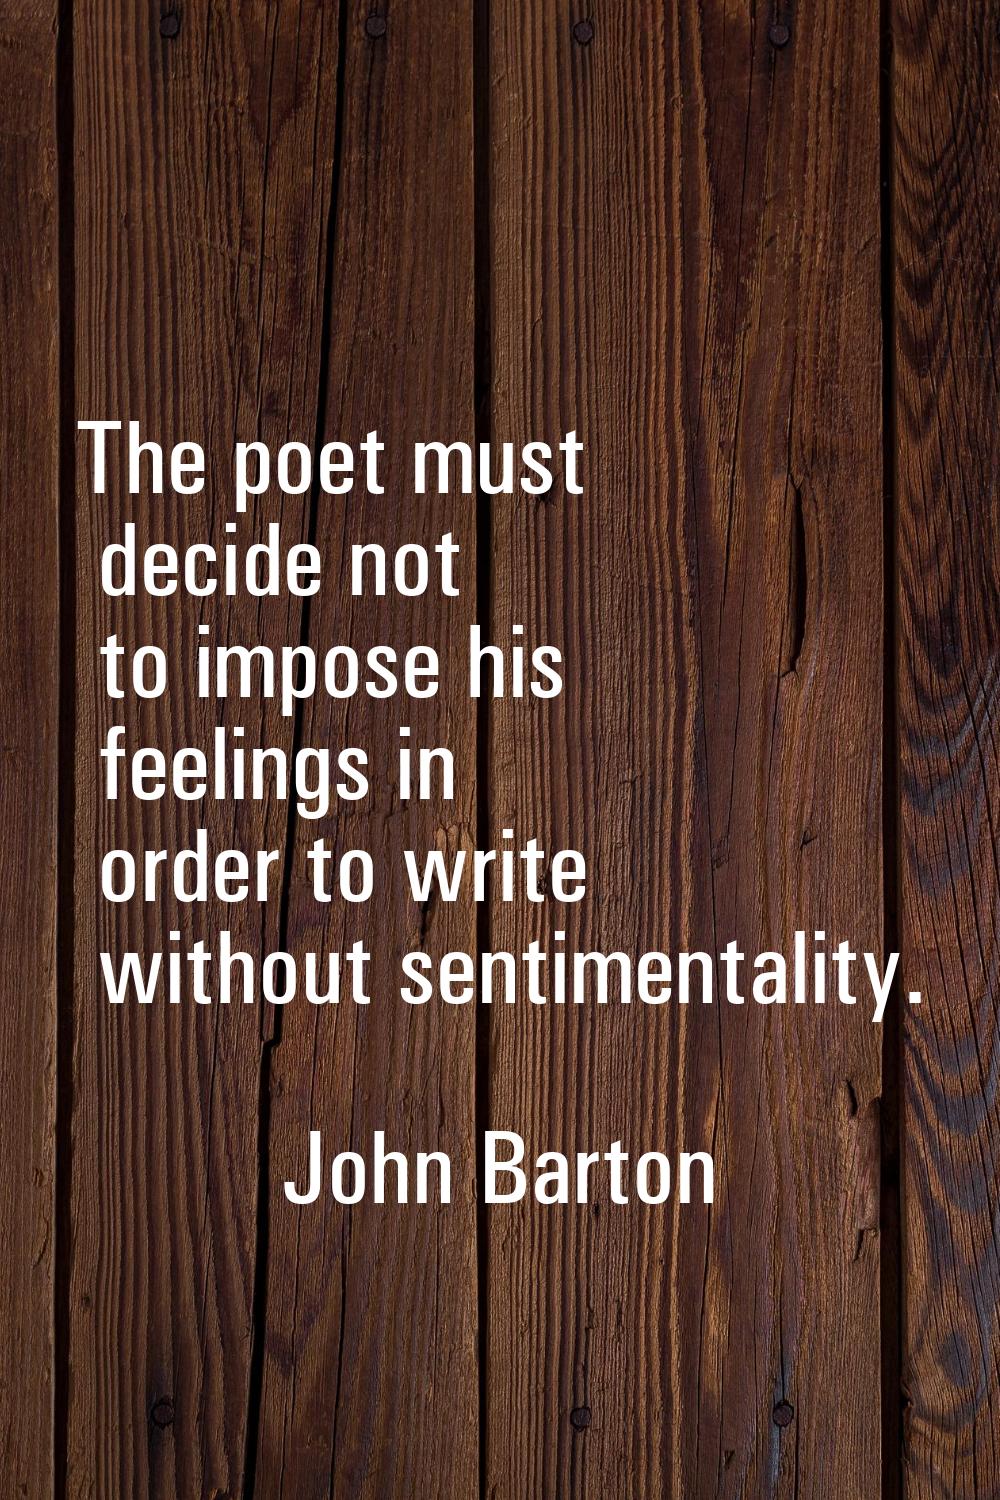 The poet must decide not to impose his feelings in order to write without sentimentality.